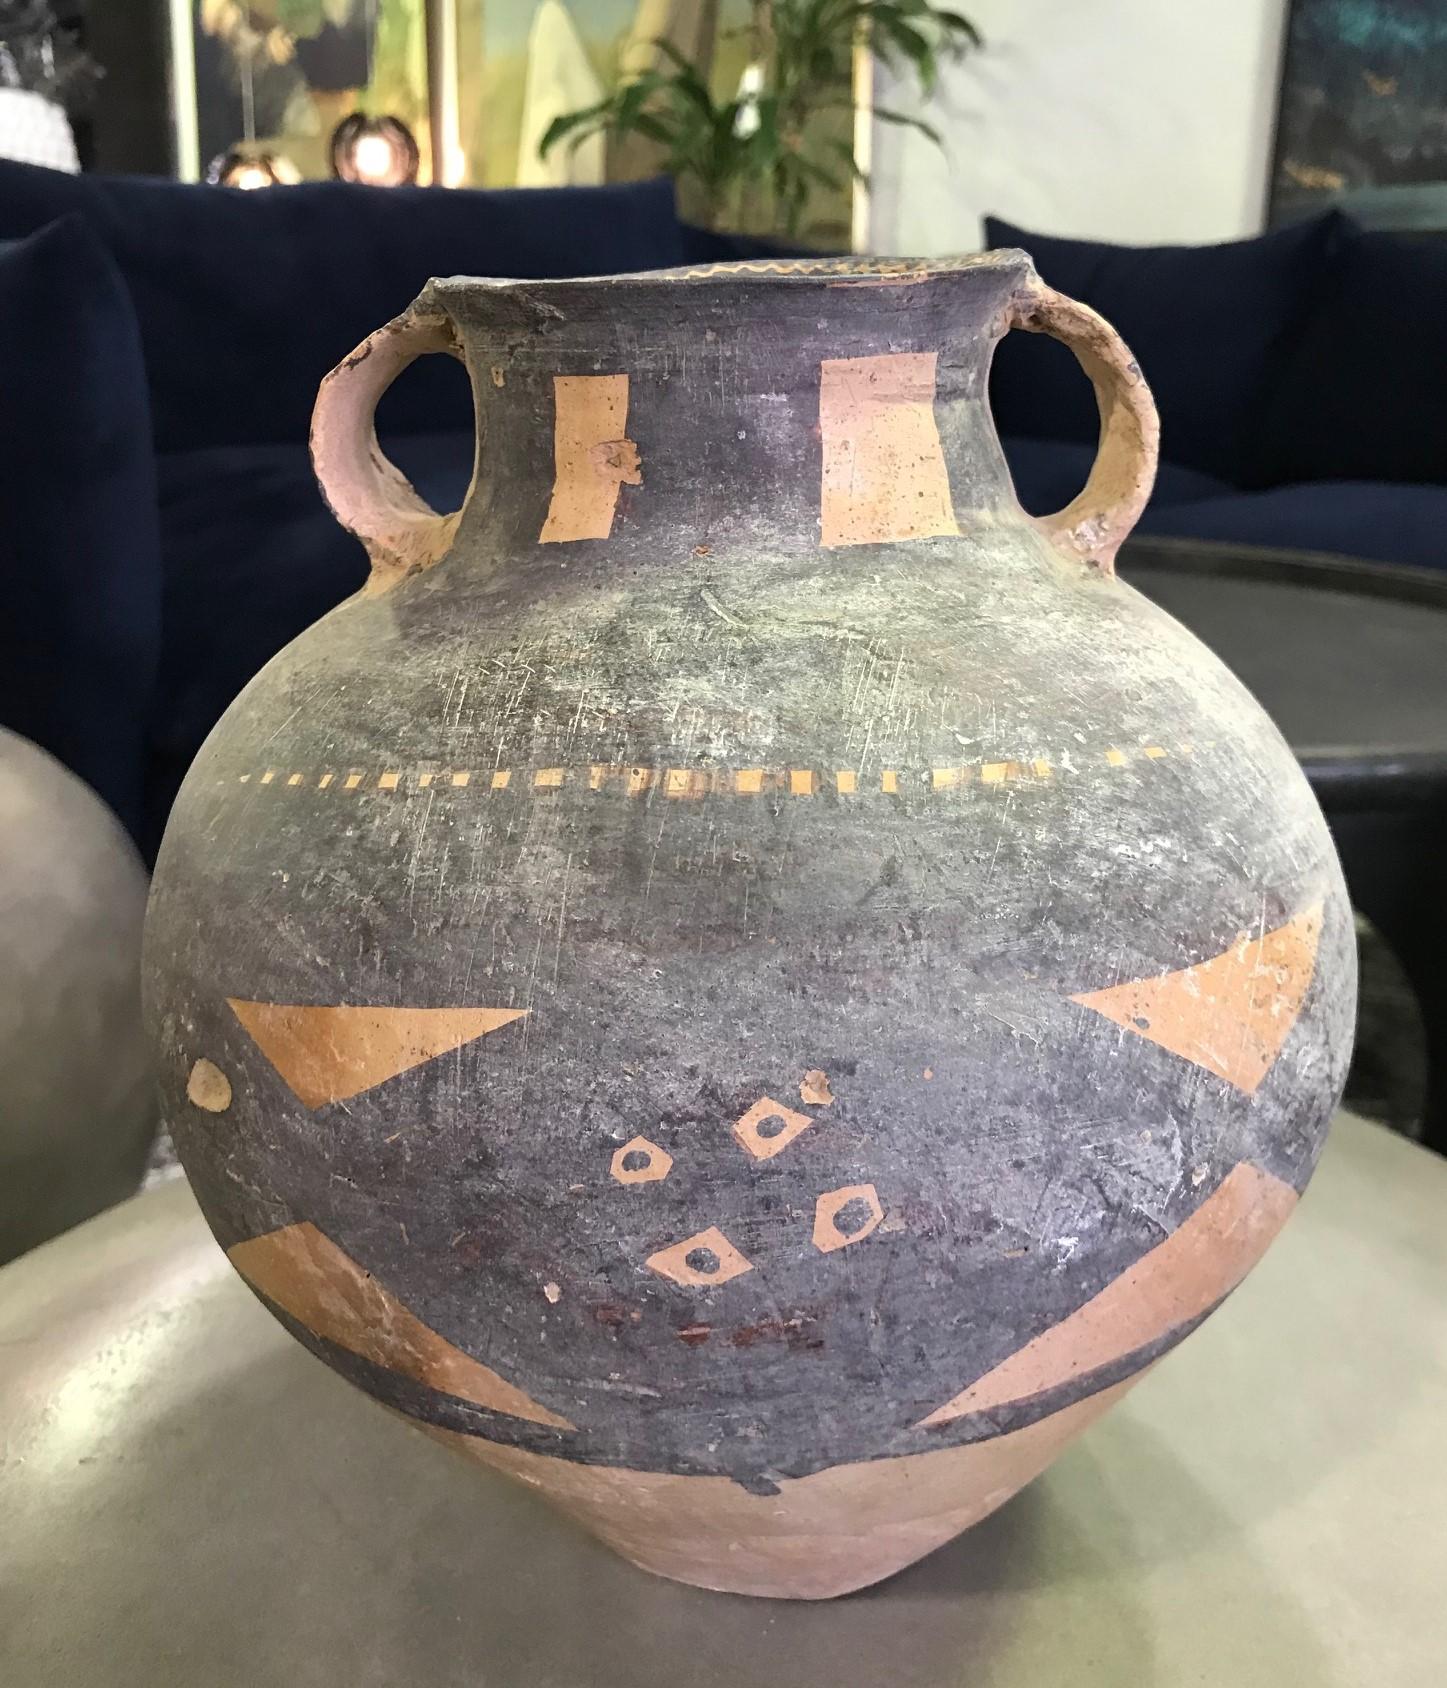 A rather wonderful and unusual large ceramic piece. Well crafted and beautifully decorated with what appears to be primitive or tribal symbols. 

We have tried to place its exact origins but aren't quite sure where this piece is from. We are